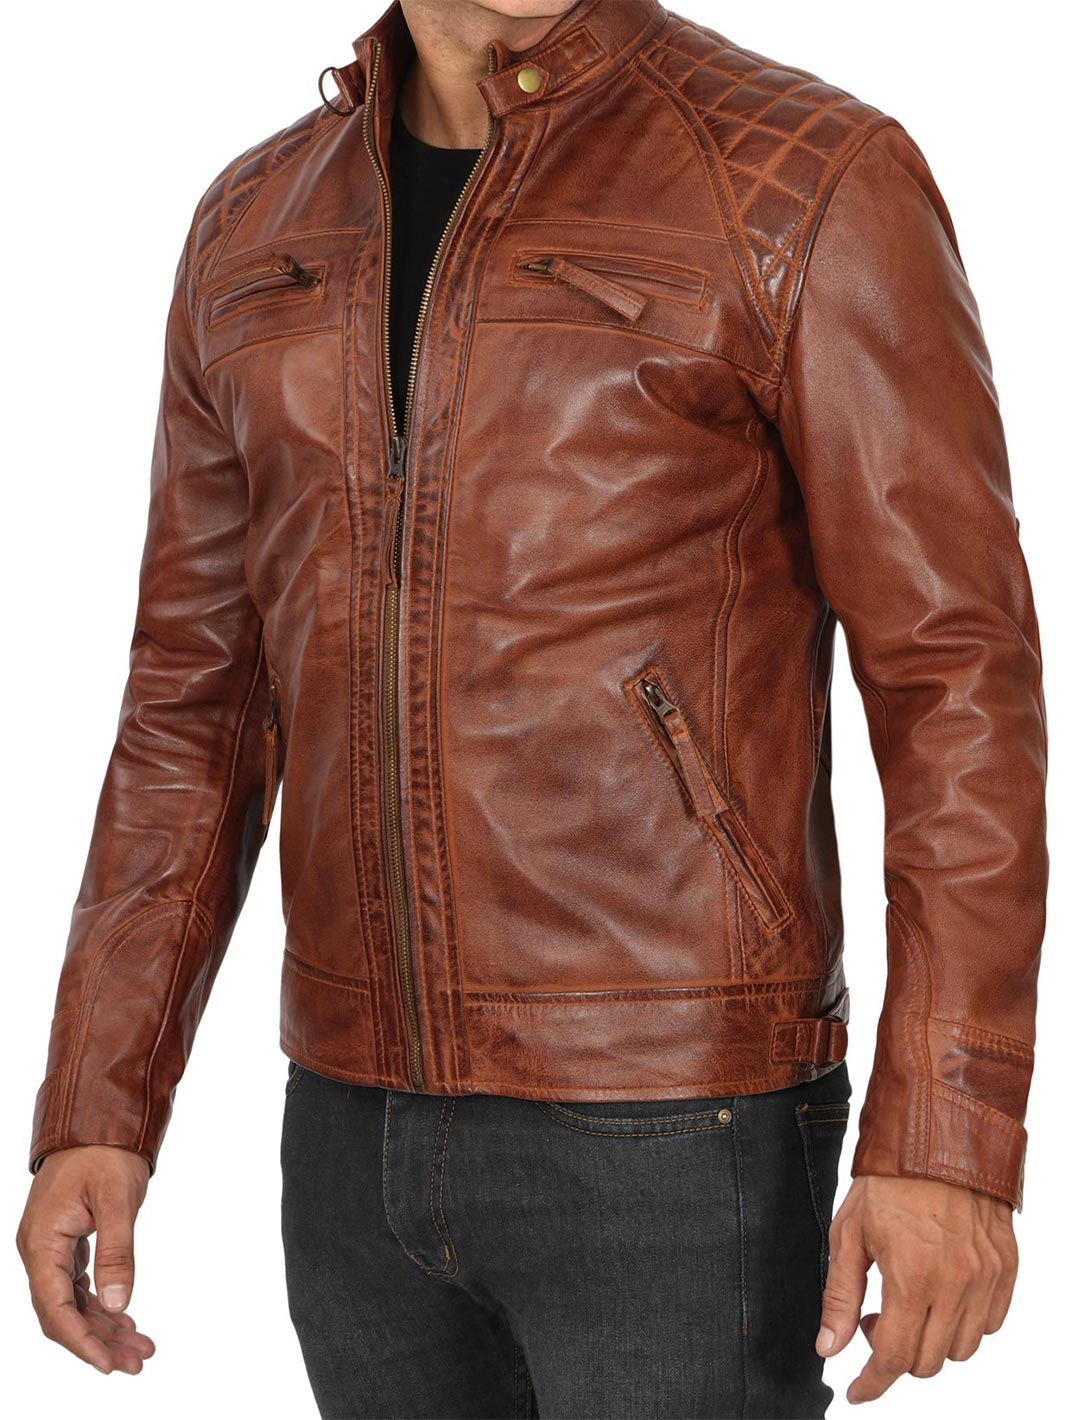 Mens Quilted brown leather jacket